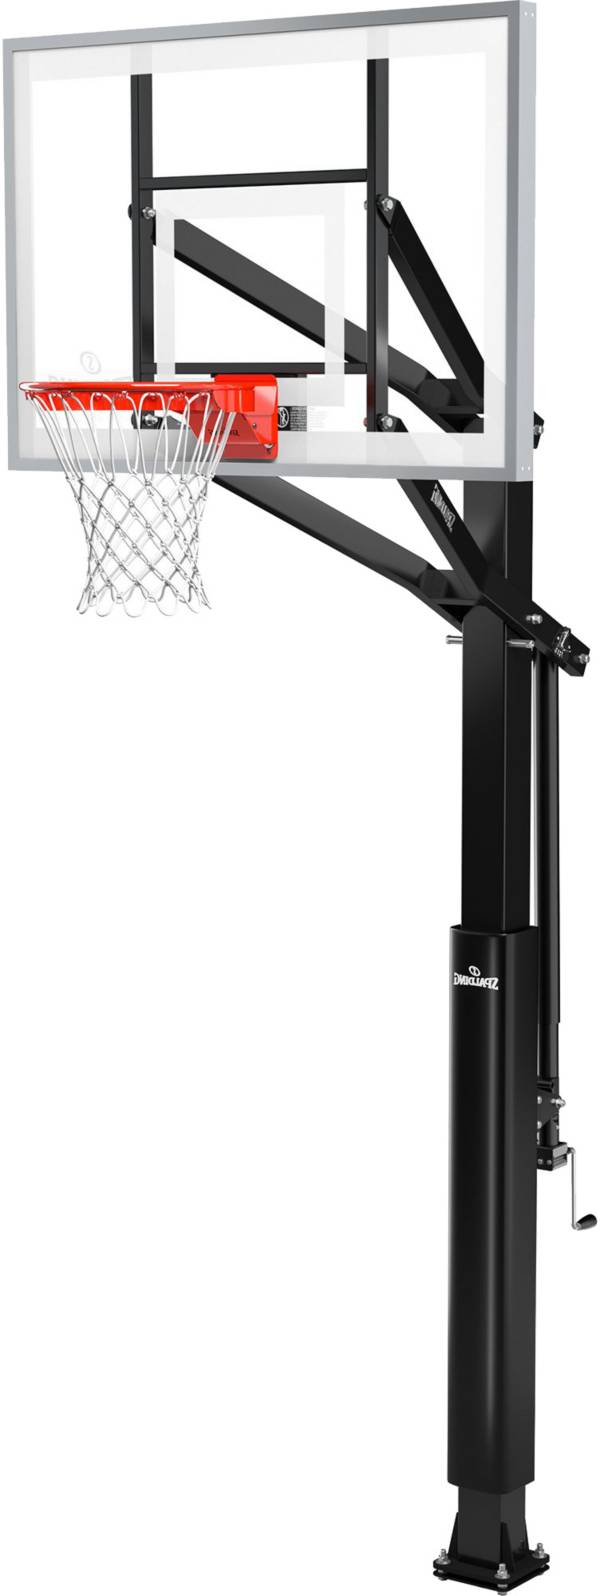 Spalding 60" Tempered Glass 888 Series In-Ground Basketball Hoop product image